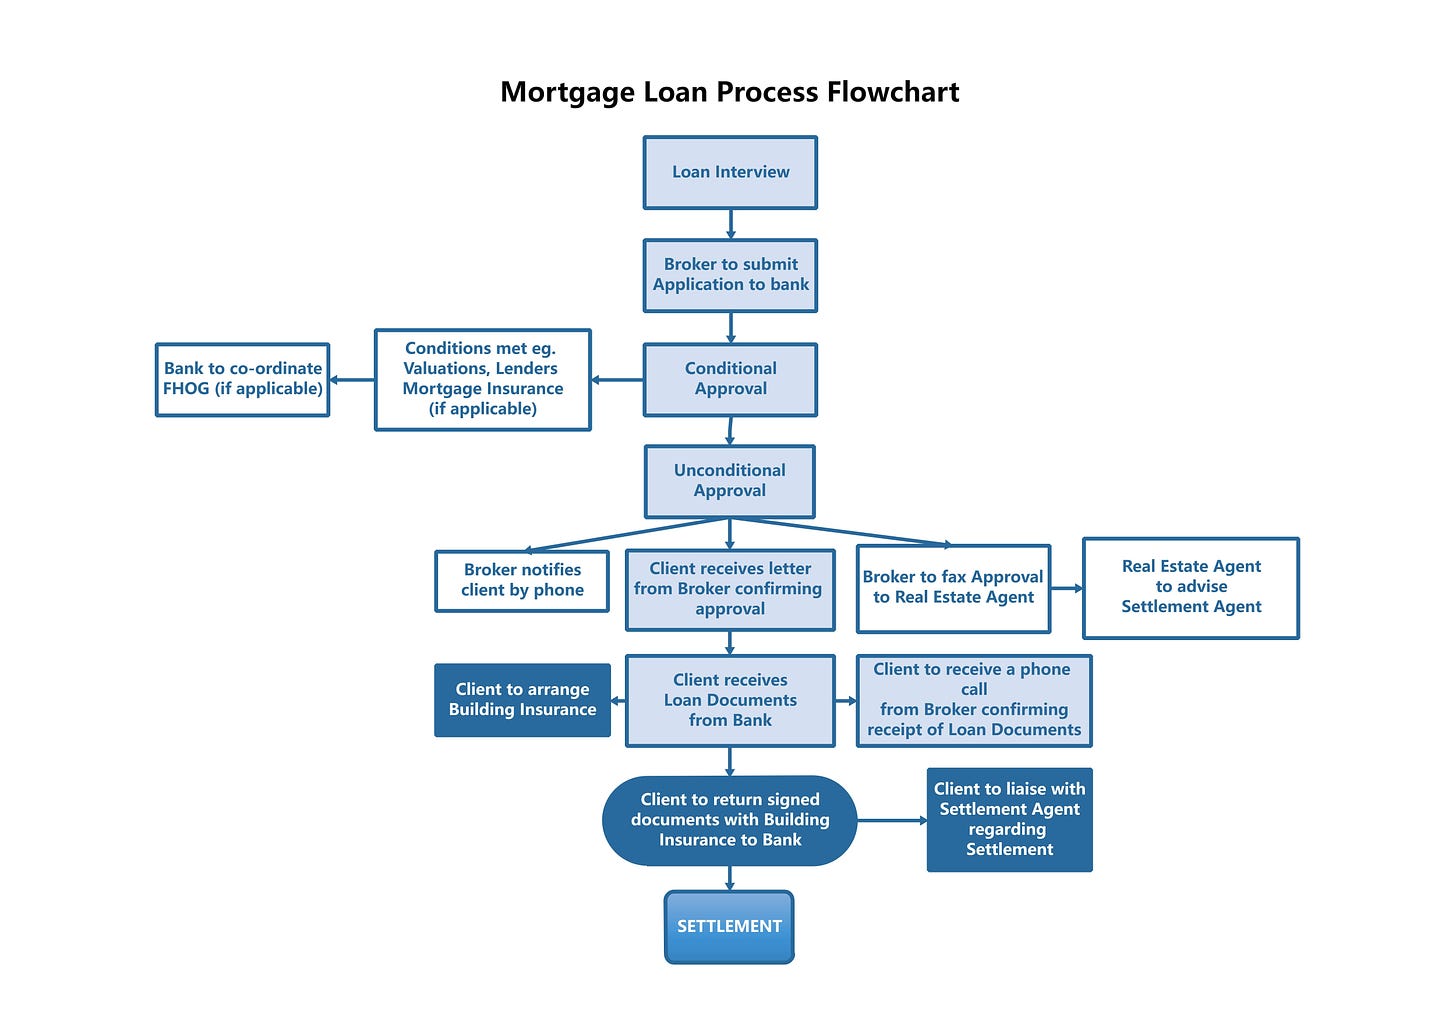 Mortgage Process Flow Charts – Uses, Examples, and Creation